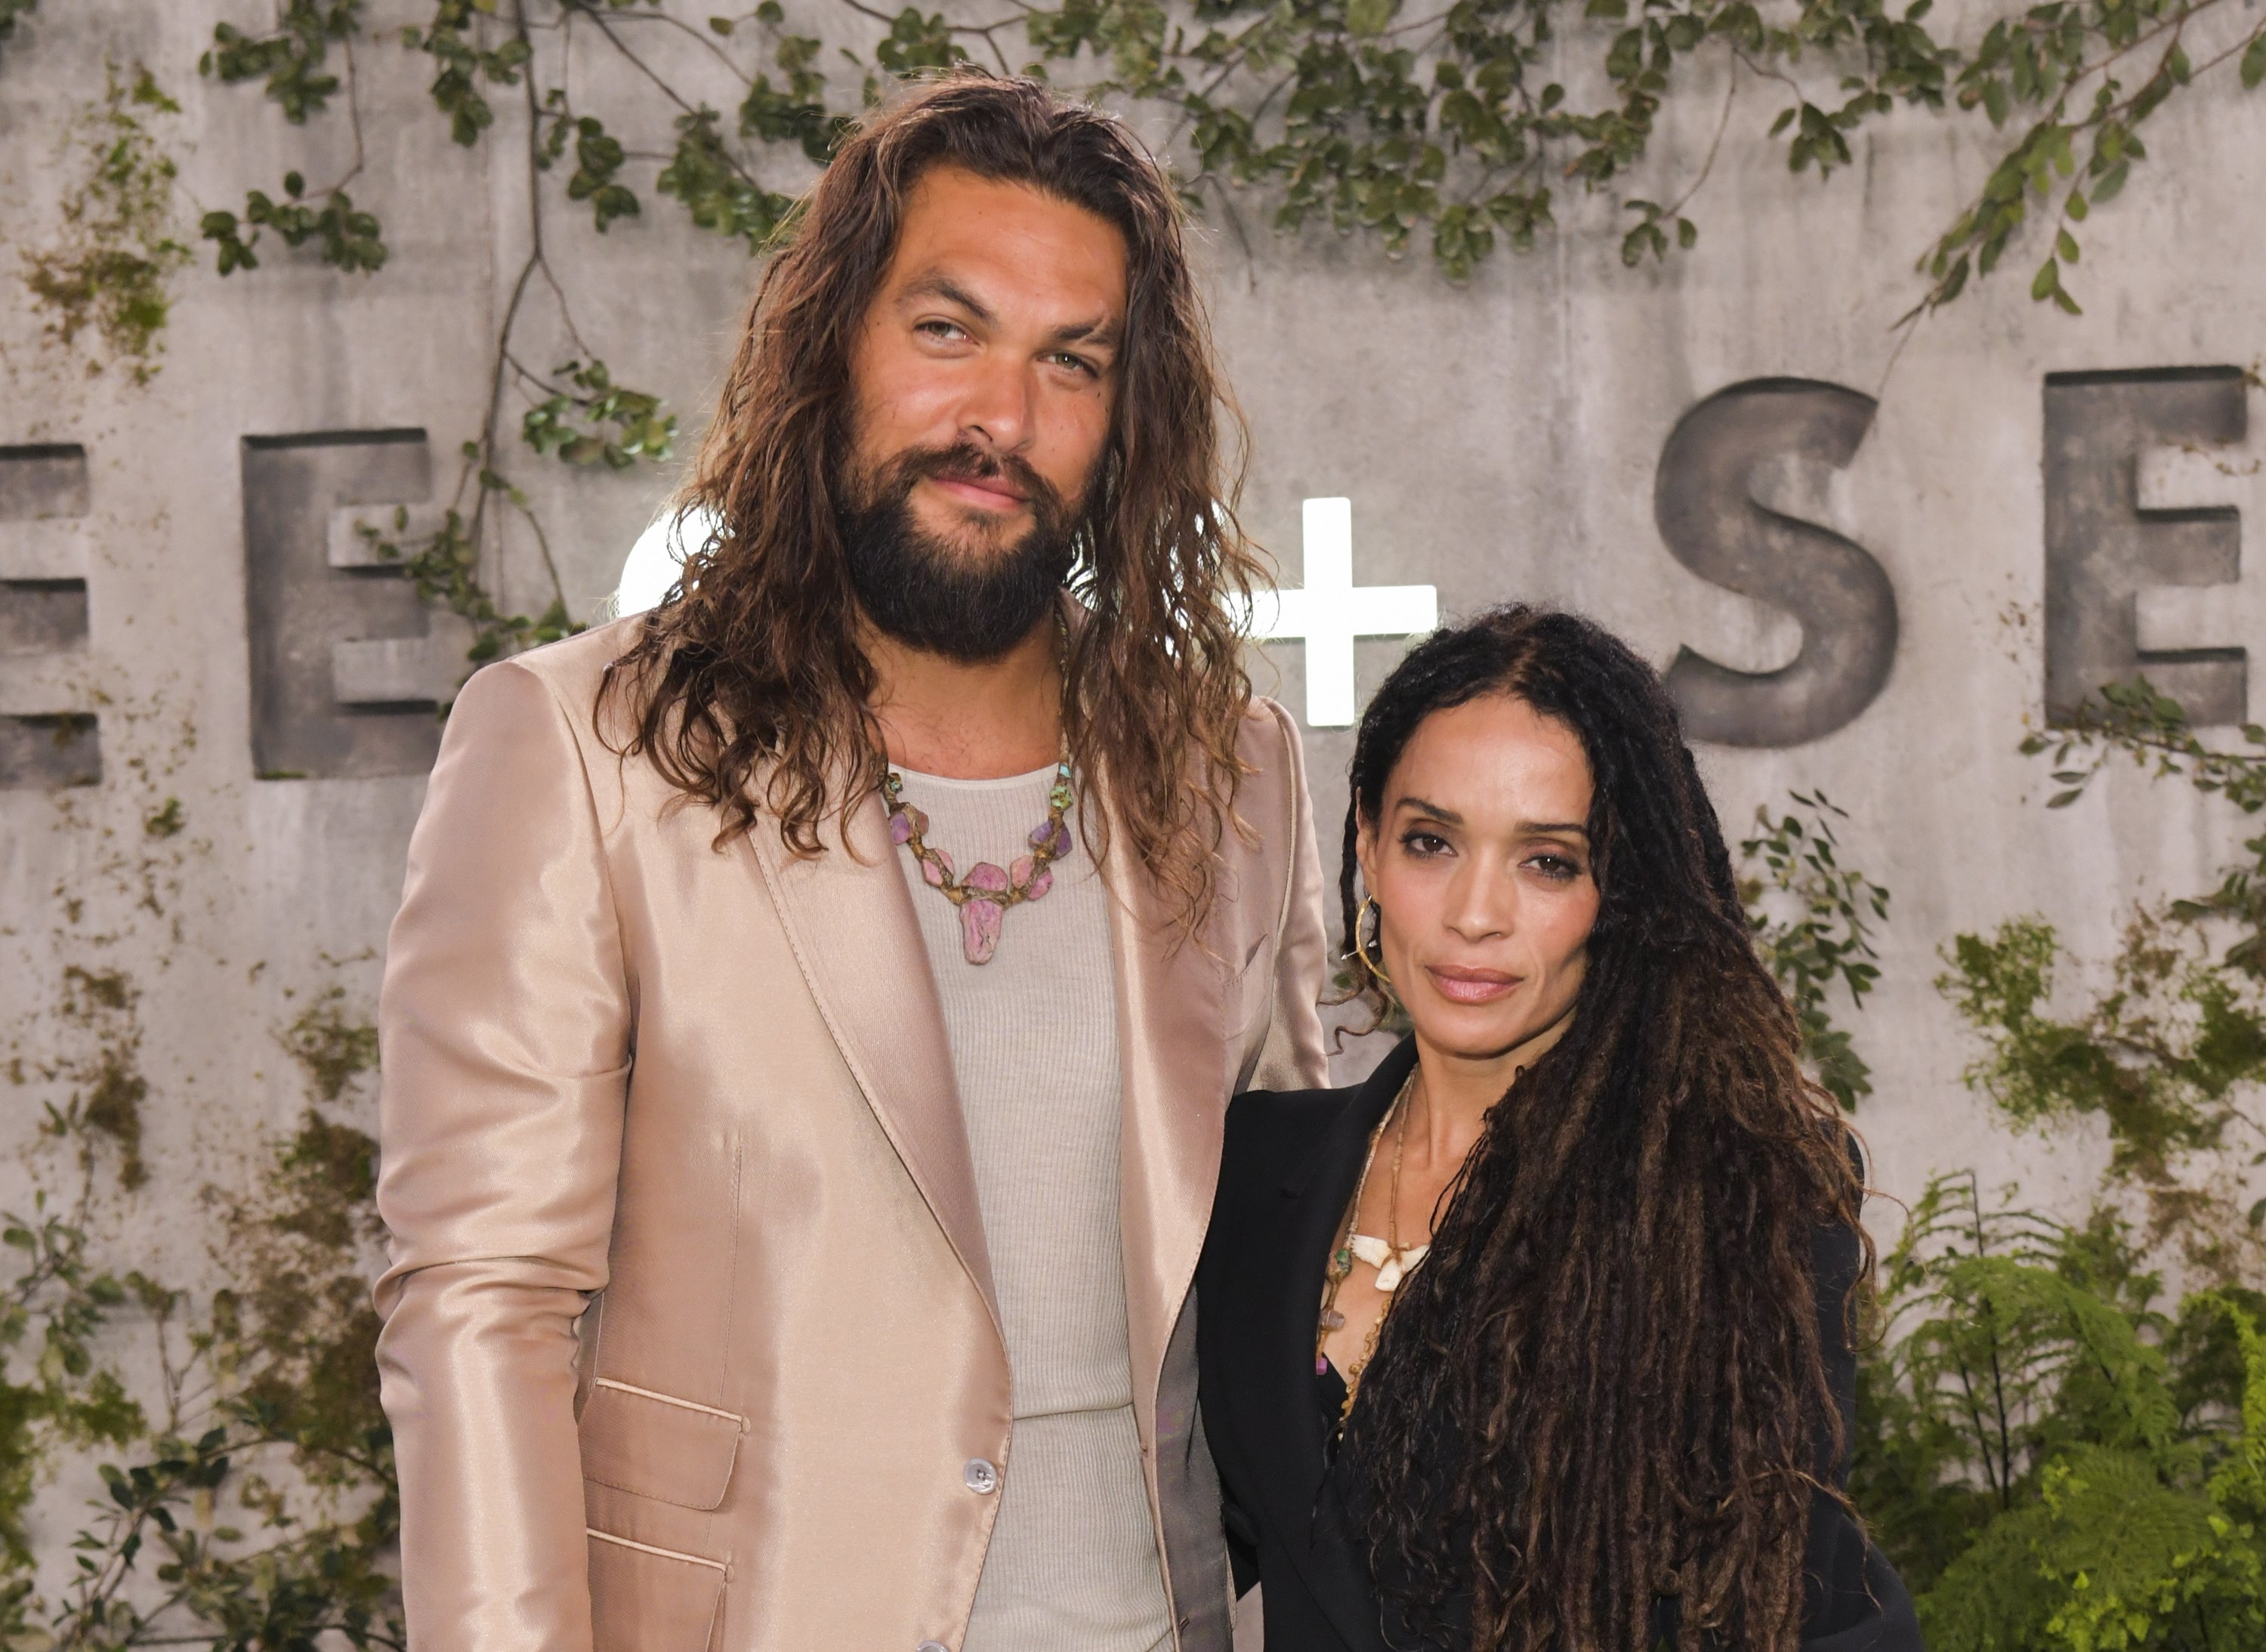 Jason Momoa and Lisa Bonet attend the world premiere of "See" at Fox Village Theater on October 21, 2019 in Los Angeles, California. | Source: Getty Images